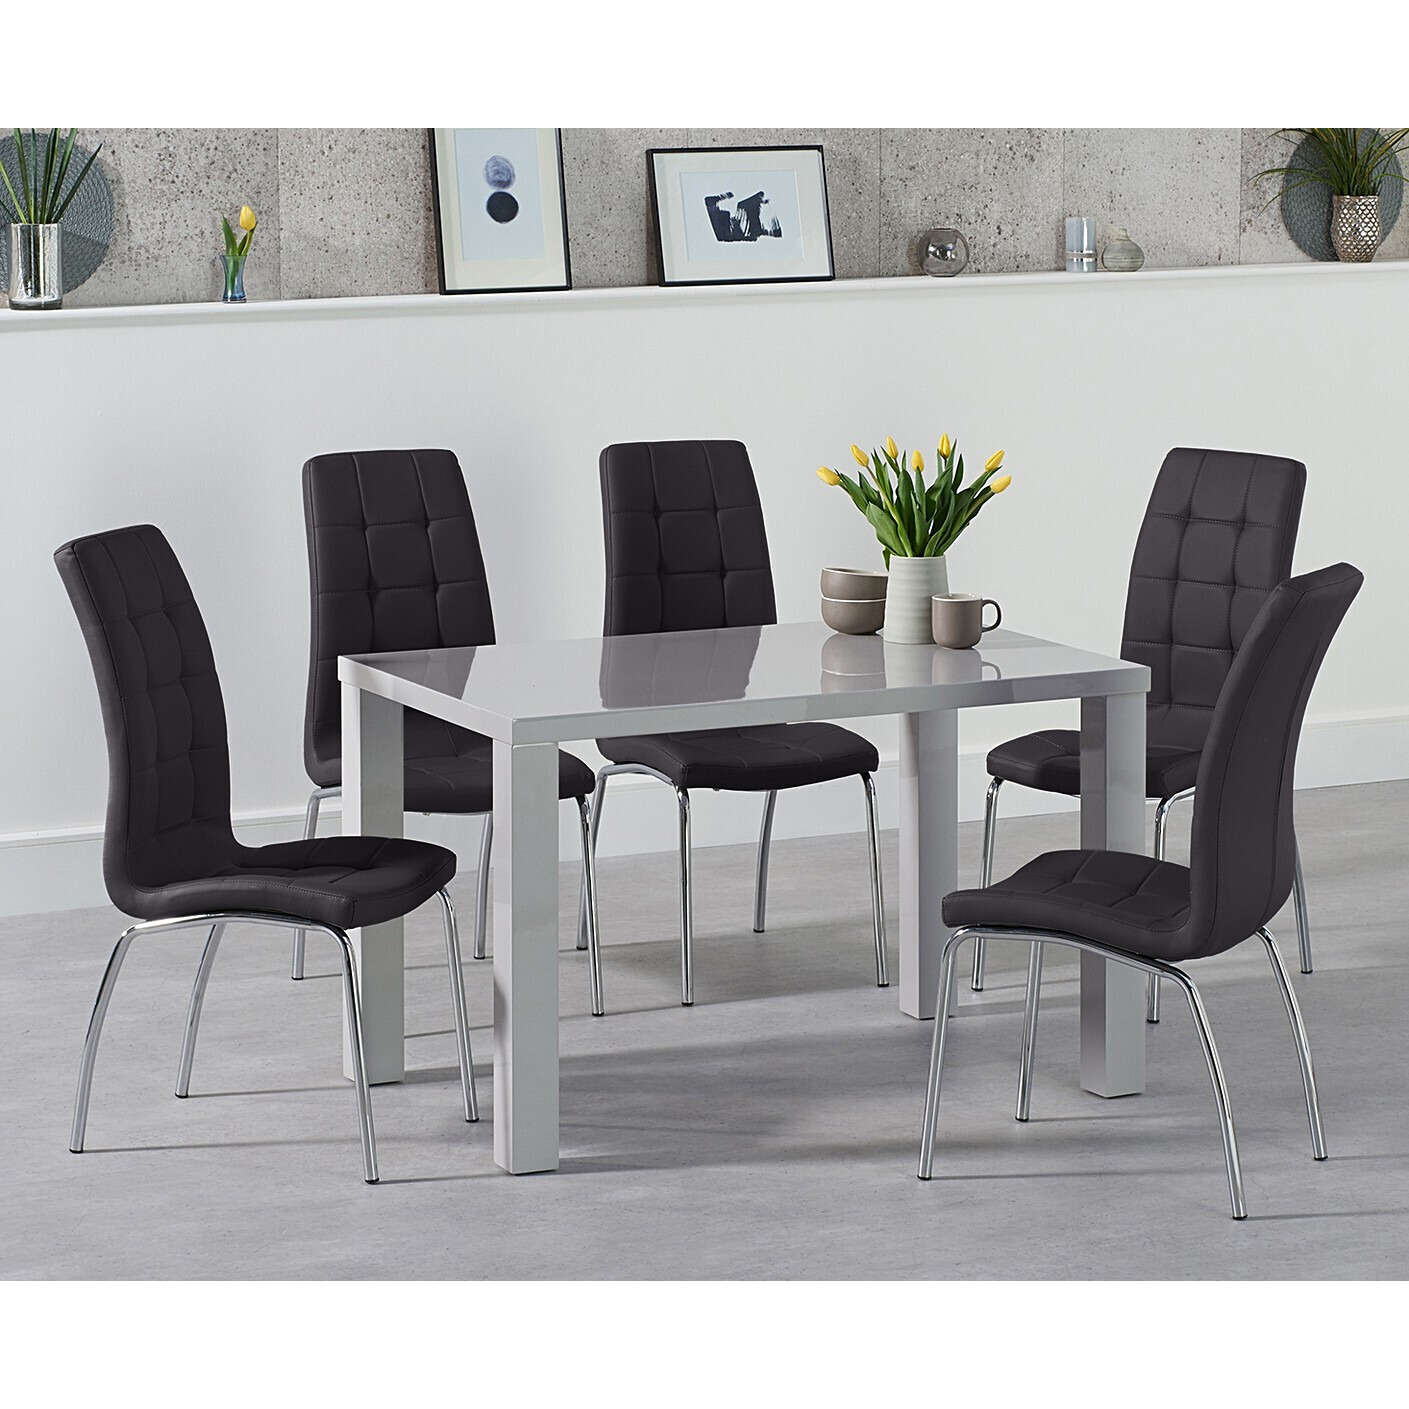 Seattle 120cm Light Grey High Gloss Dining Table with 4 White Enzo Chairs